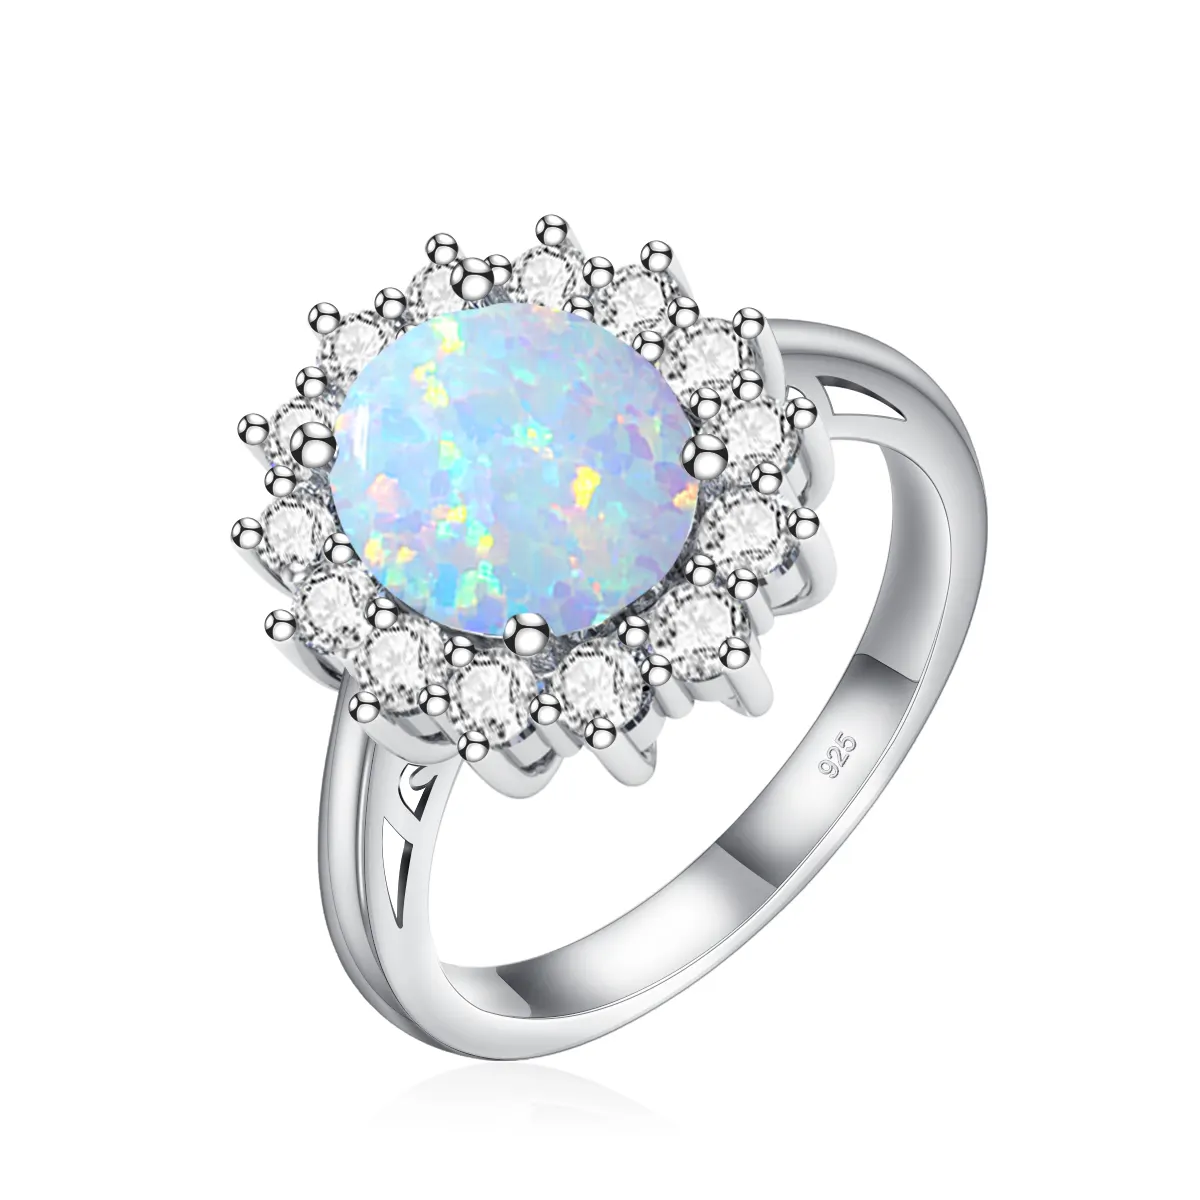 Premium Quality Royal Jewelry Gift Woman 925 Sterling Silver Birthstone Opal Rings Jewelery